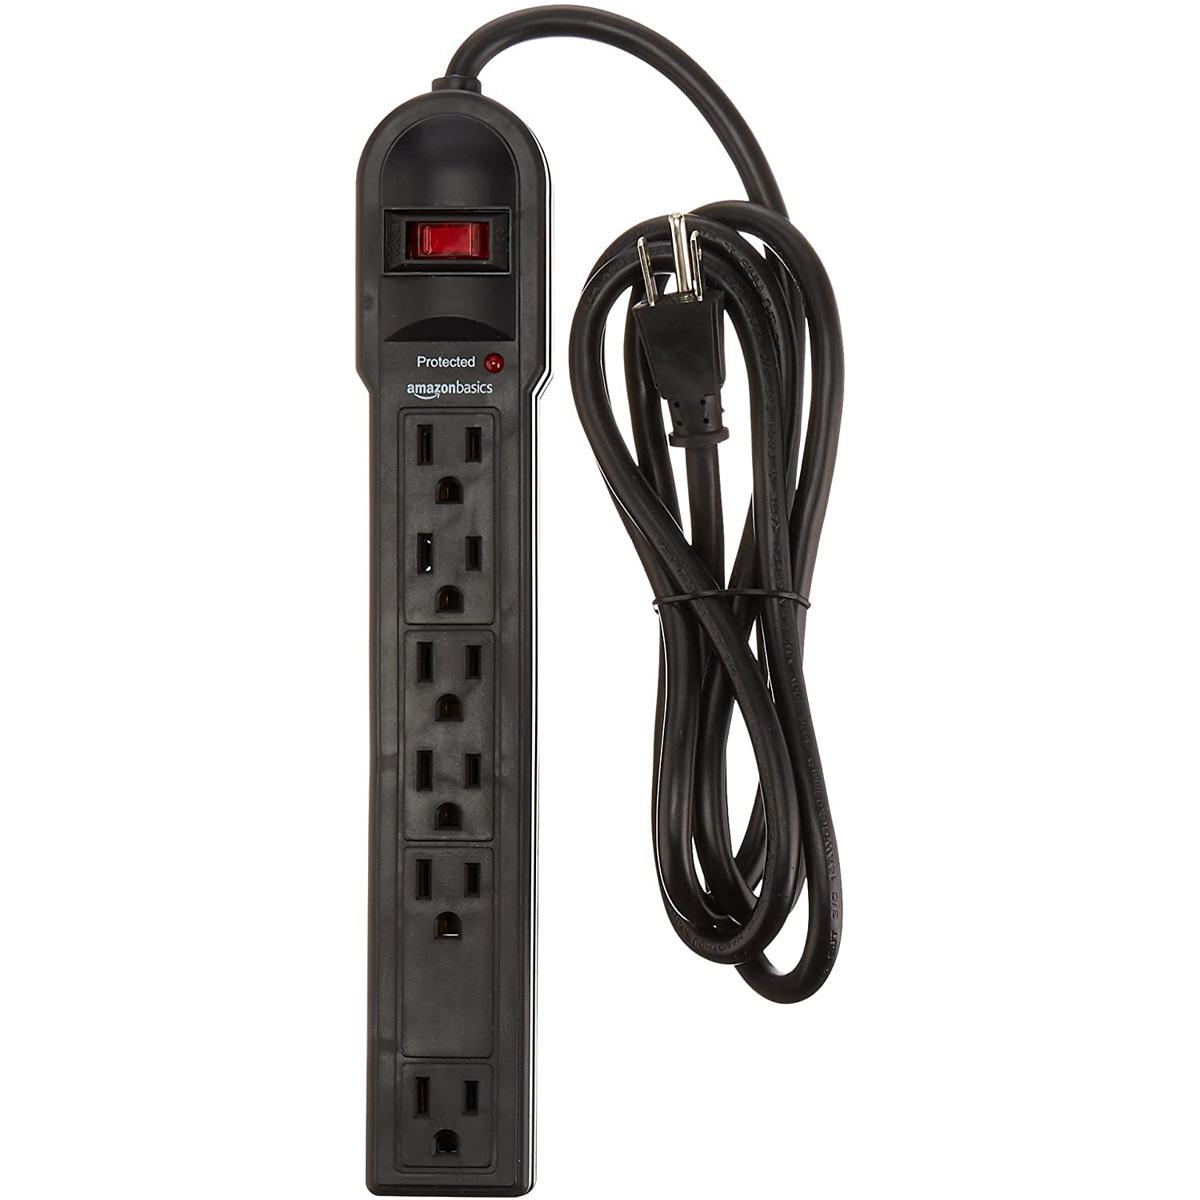 AmazonBasics 6-Outlet Power Strip for $4.99